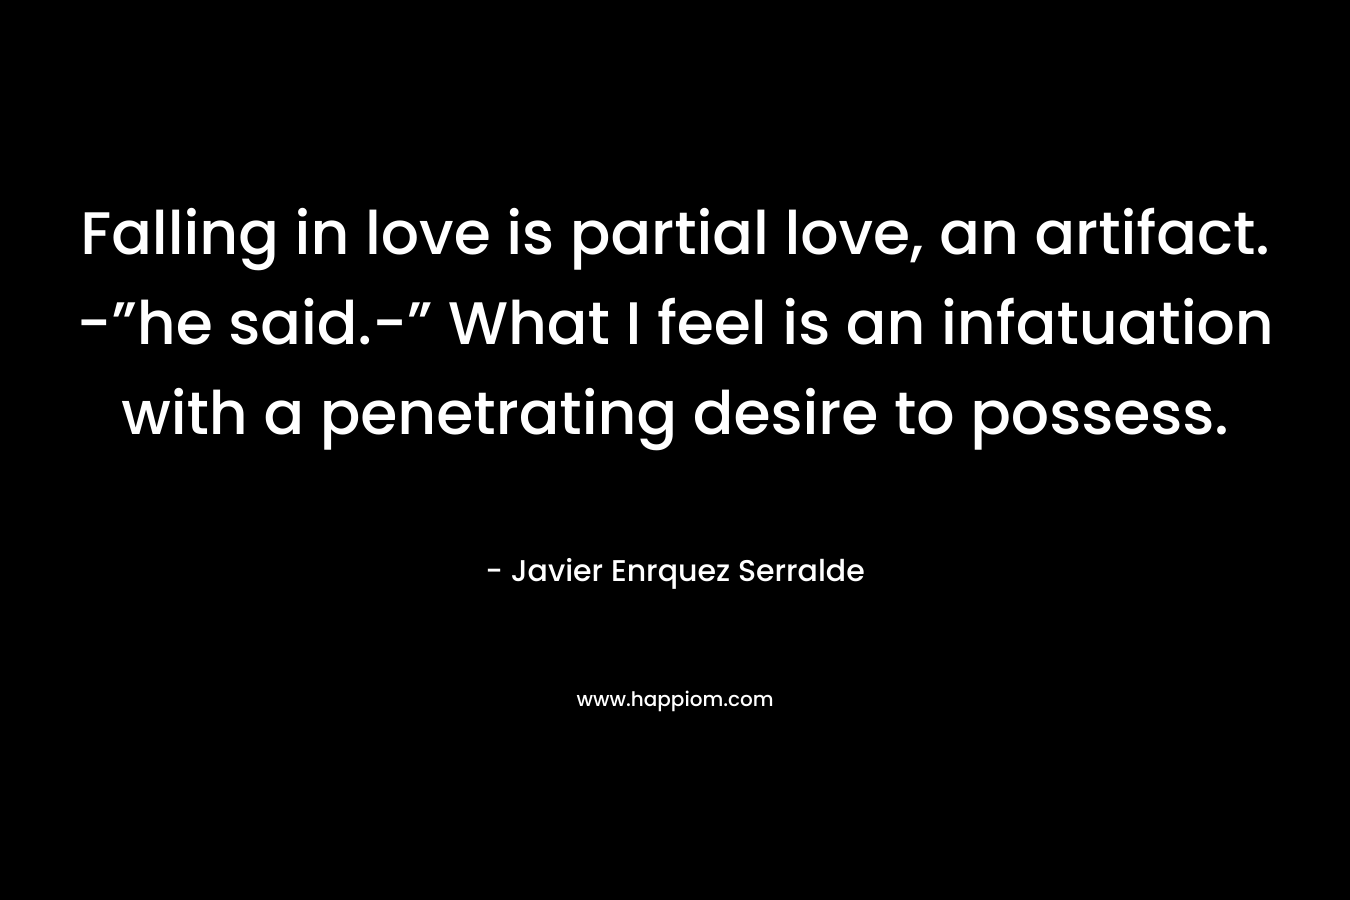 Falling in love is partial love, an artifact. -”he said.-” What I feel is an infatuation with a penetrating desire to possess. – Javier Enrquez Serralde